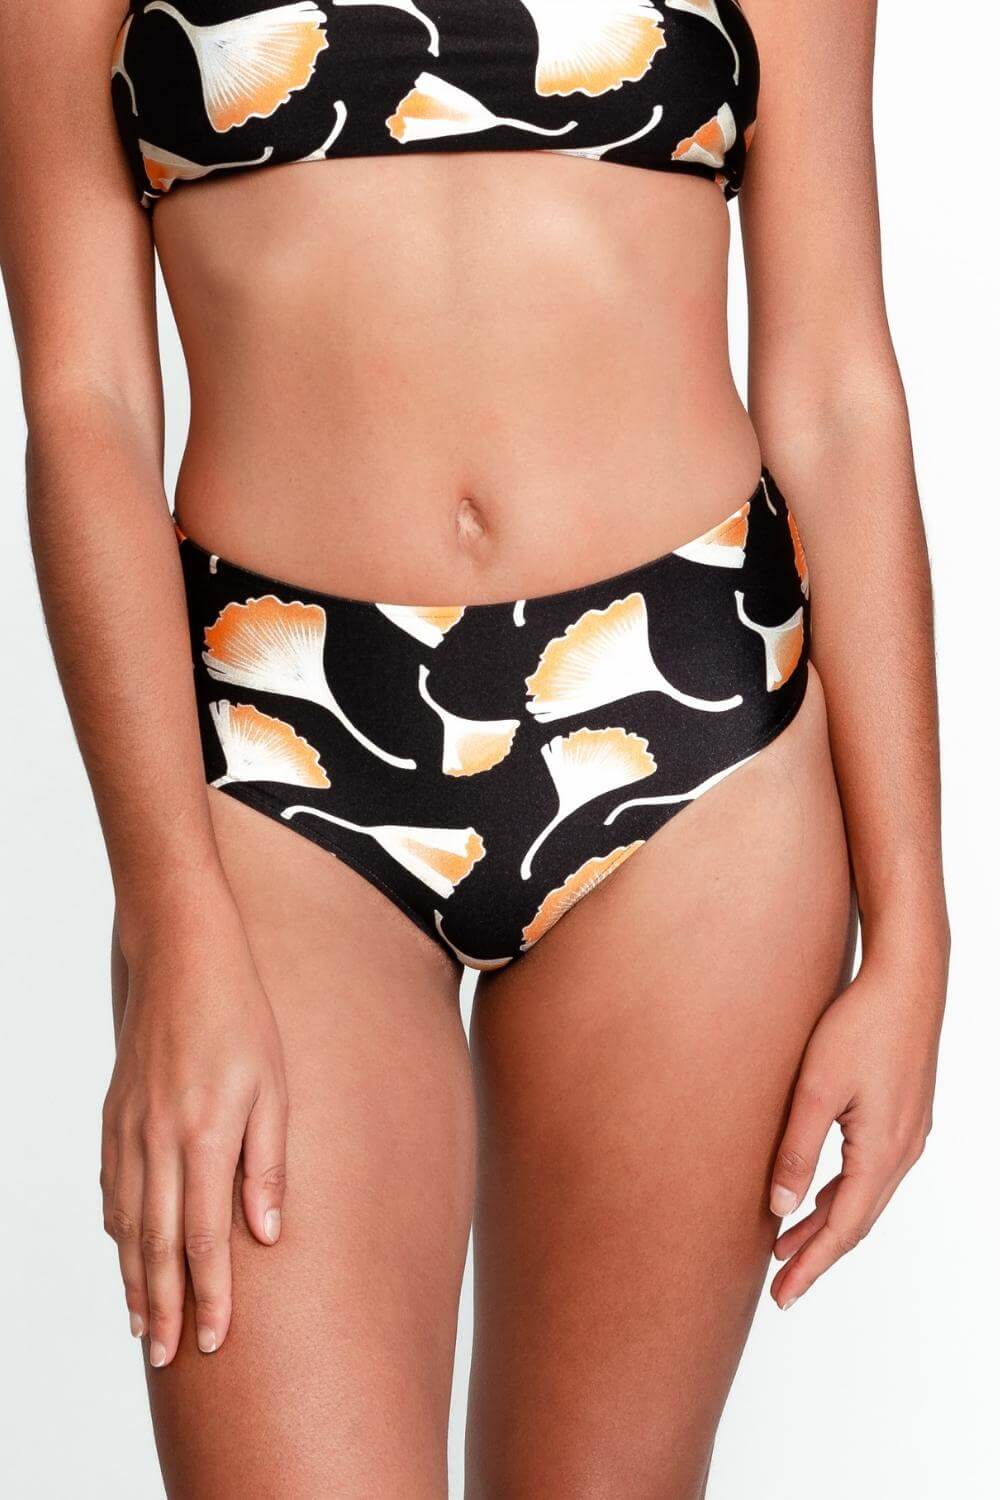 Detail of the hipster bikini bottom in black print. This mid-rise bottom offers great coverage on front and back.